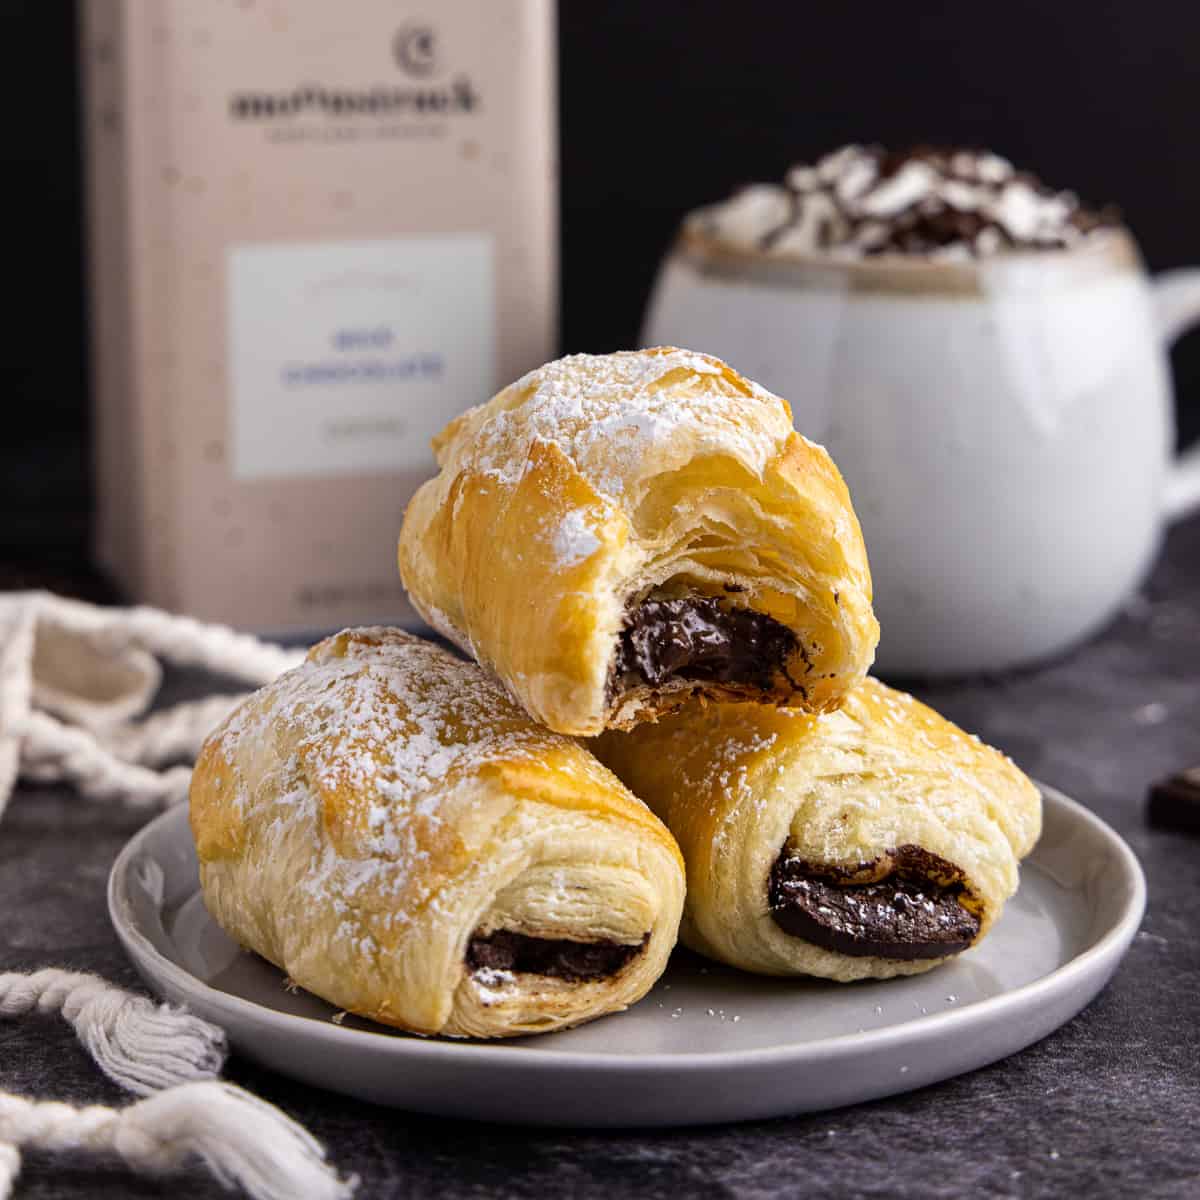 Chocolate filled pastry (pain au chocolat)